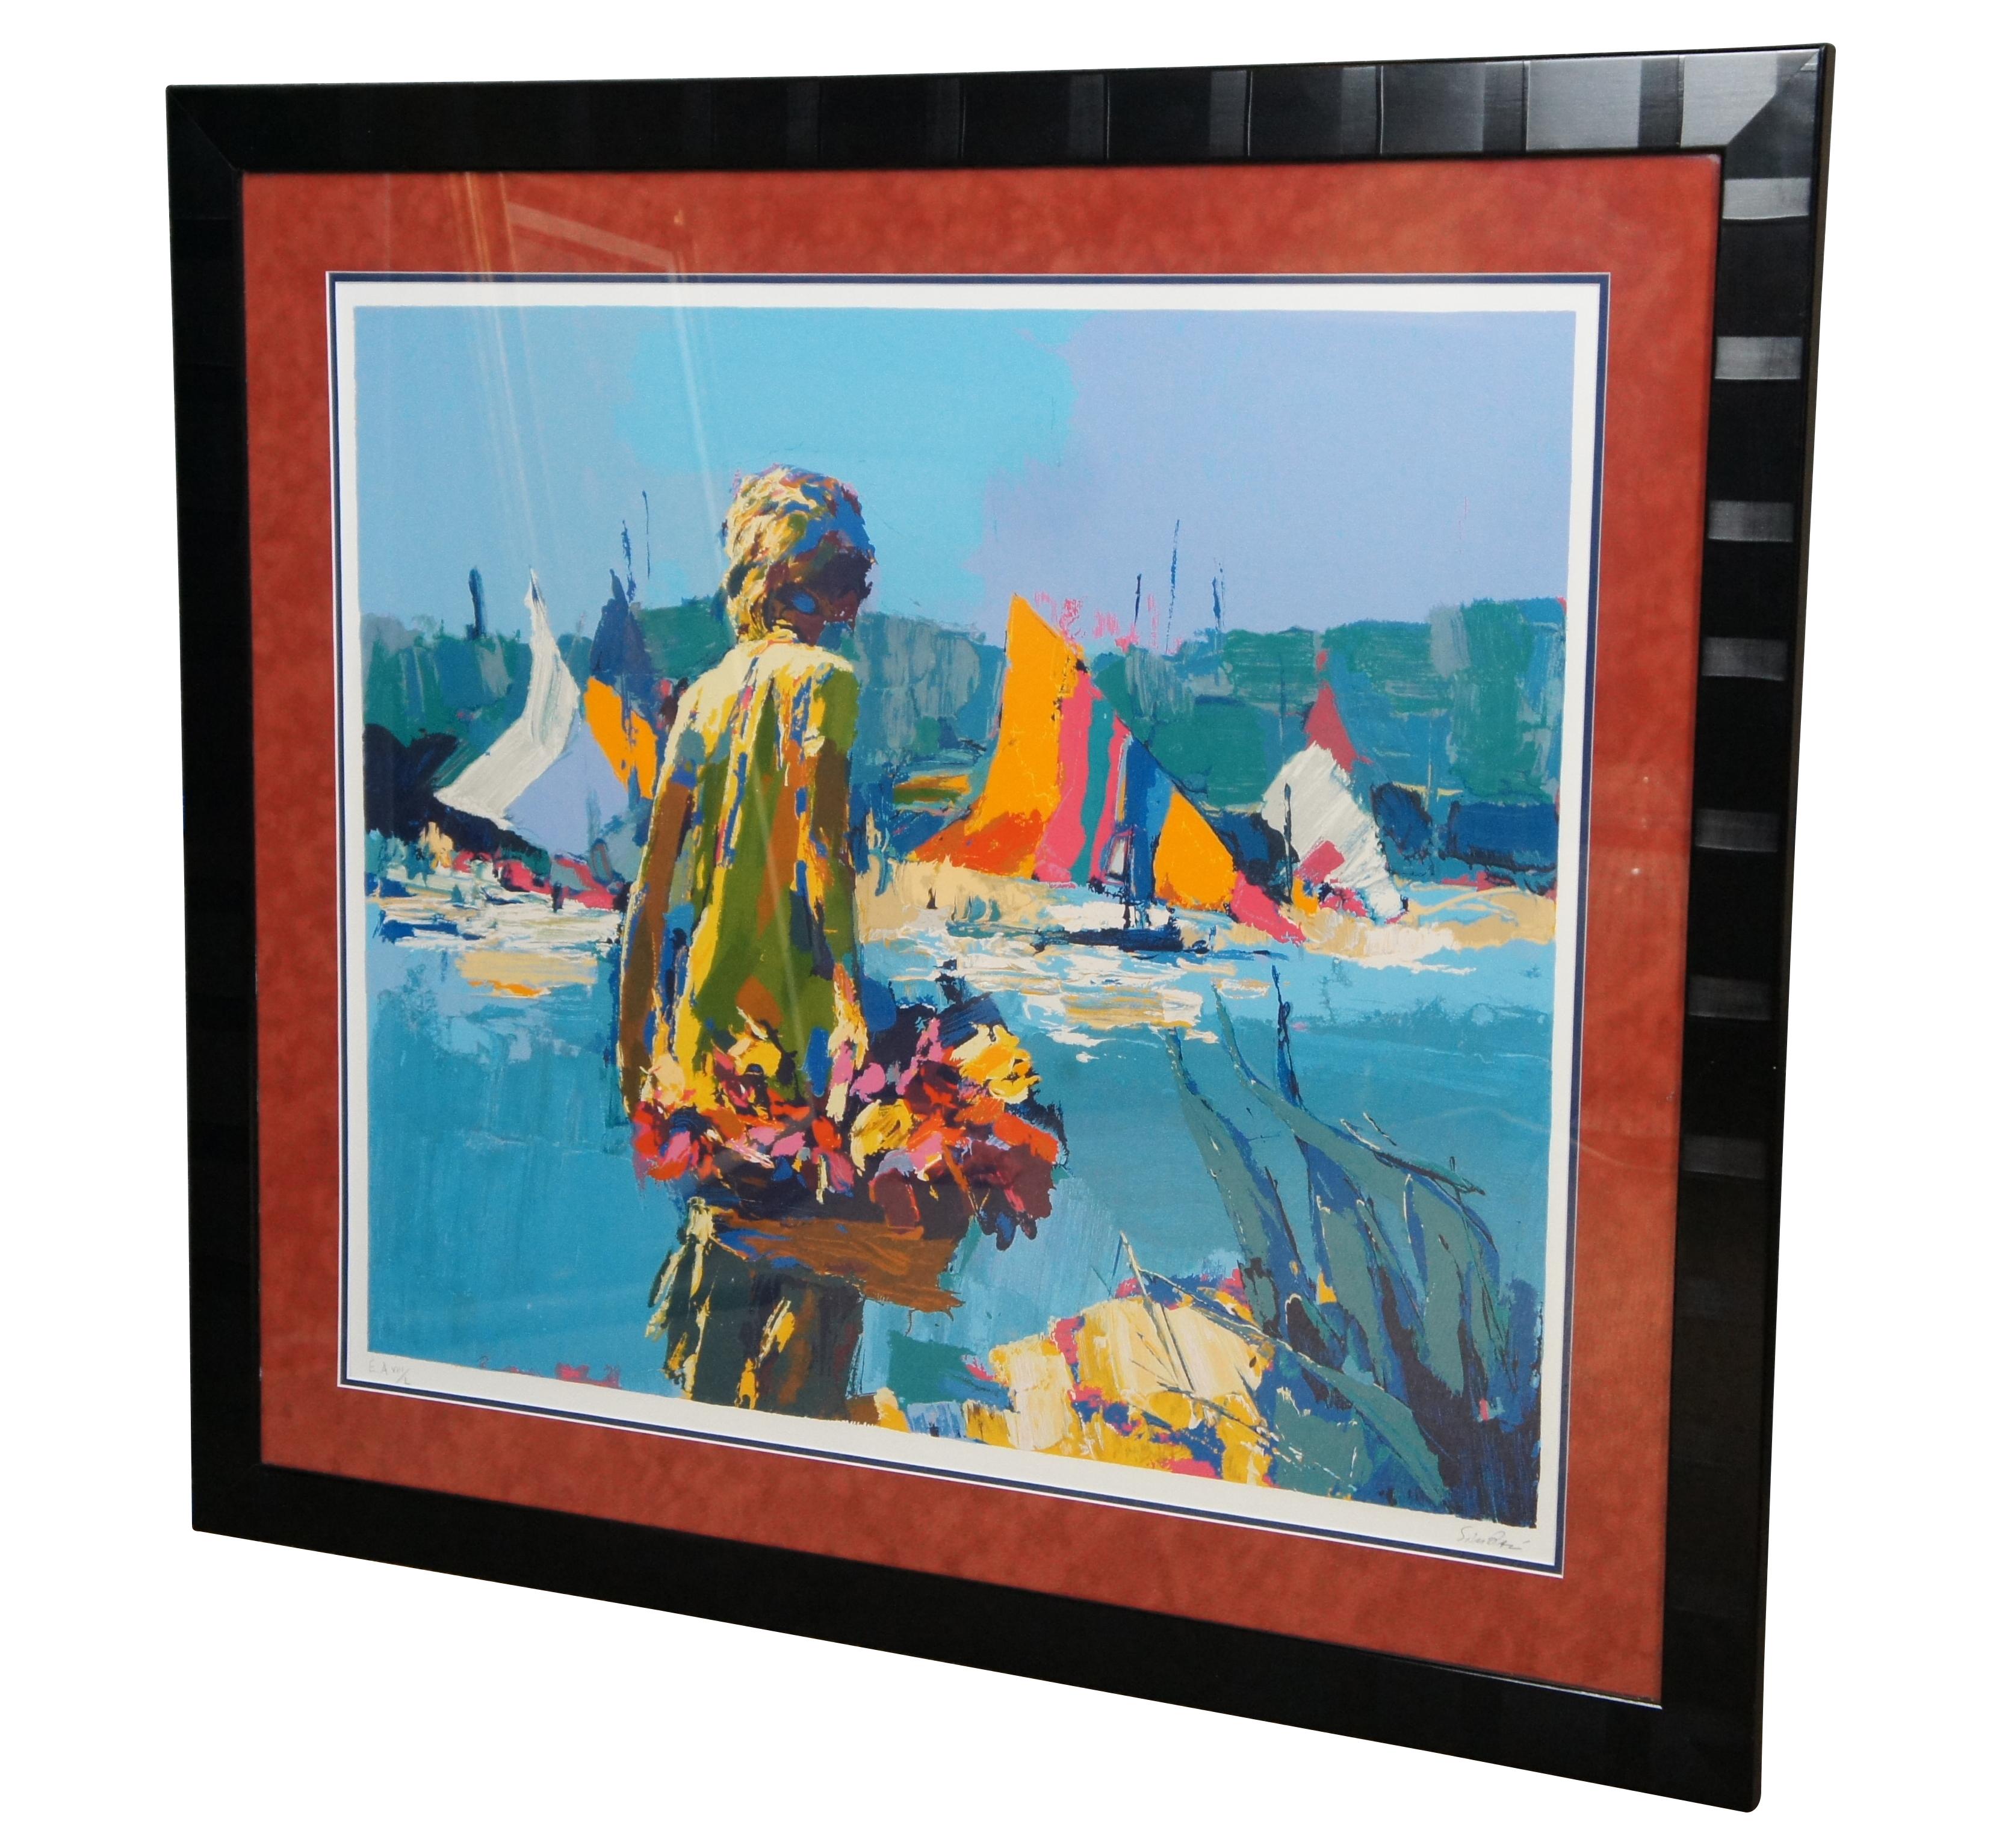 Vintage framed serigraph on paper showing a figure carrying a basket of flowers in front of a nautical / maritime water scene with brightly colored sail boats by Nicola Simbari. Titled “Summertime,” pencil signed and numbered EA VIII/L. Circa